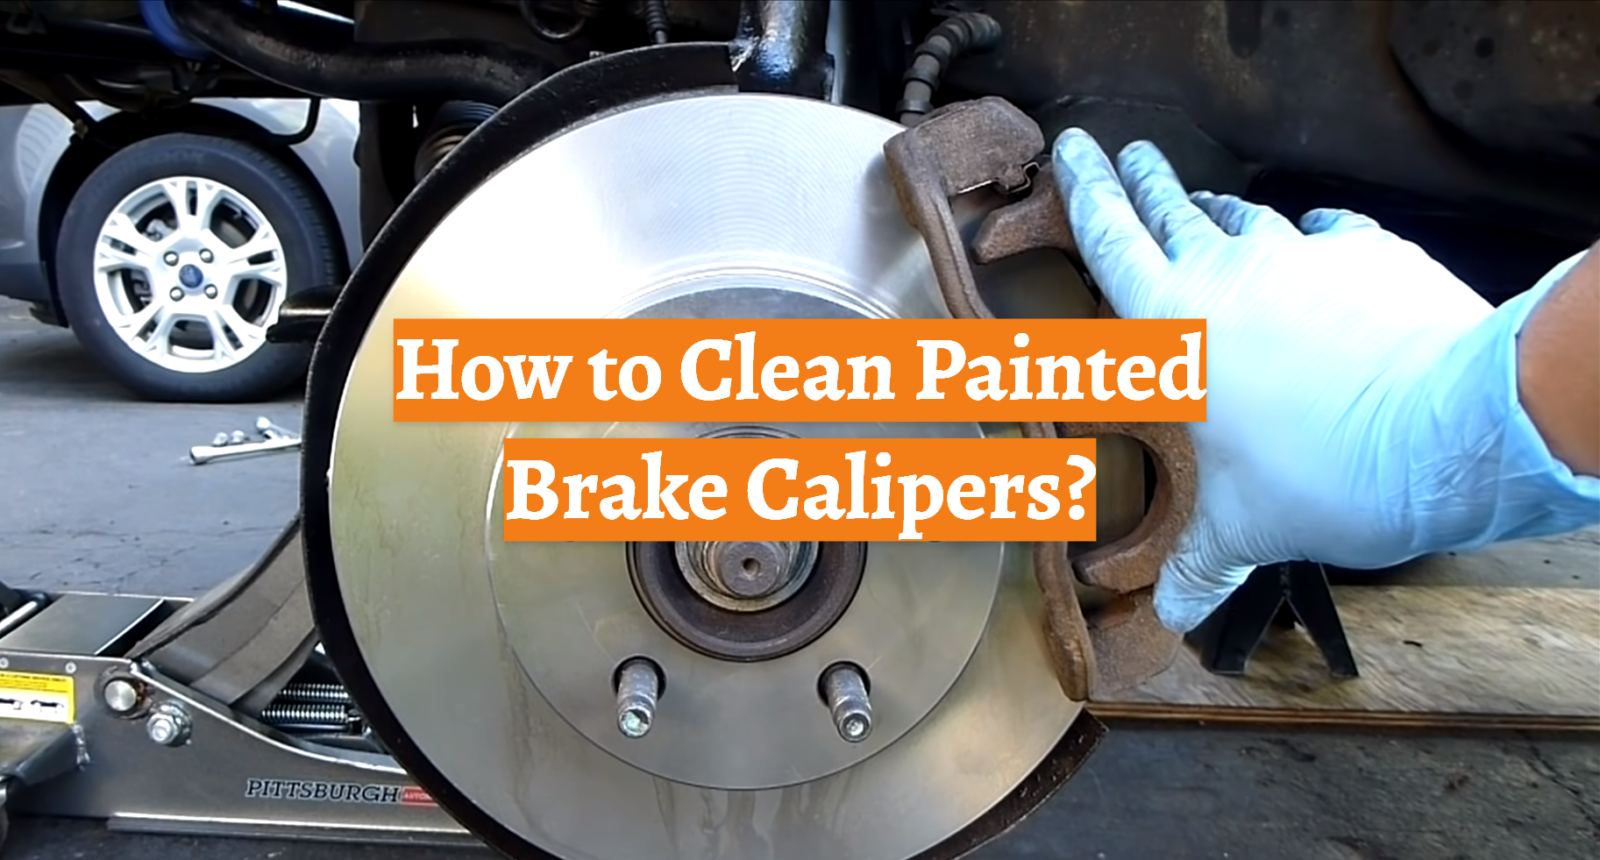 How to Clean Painted Brake Calipers?